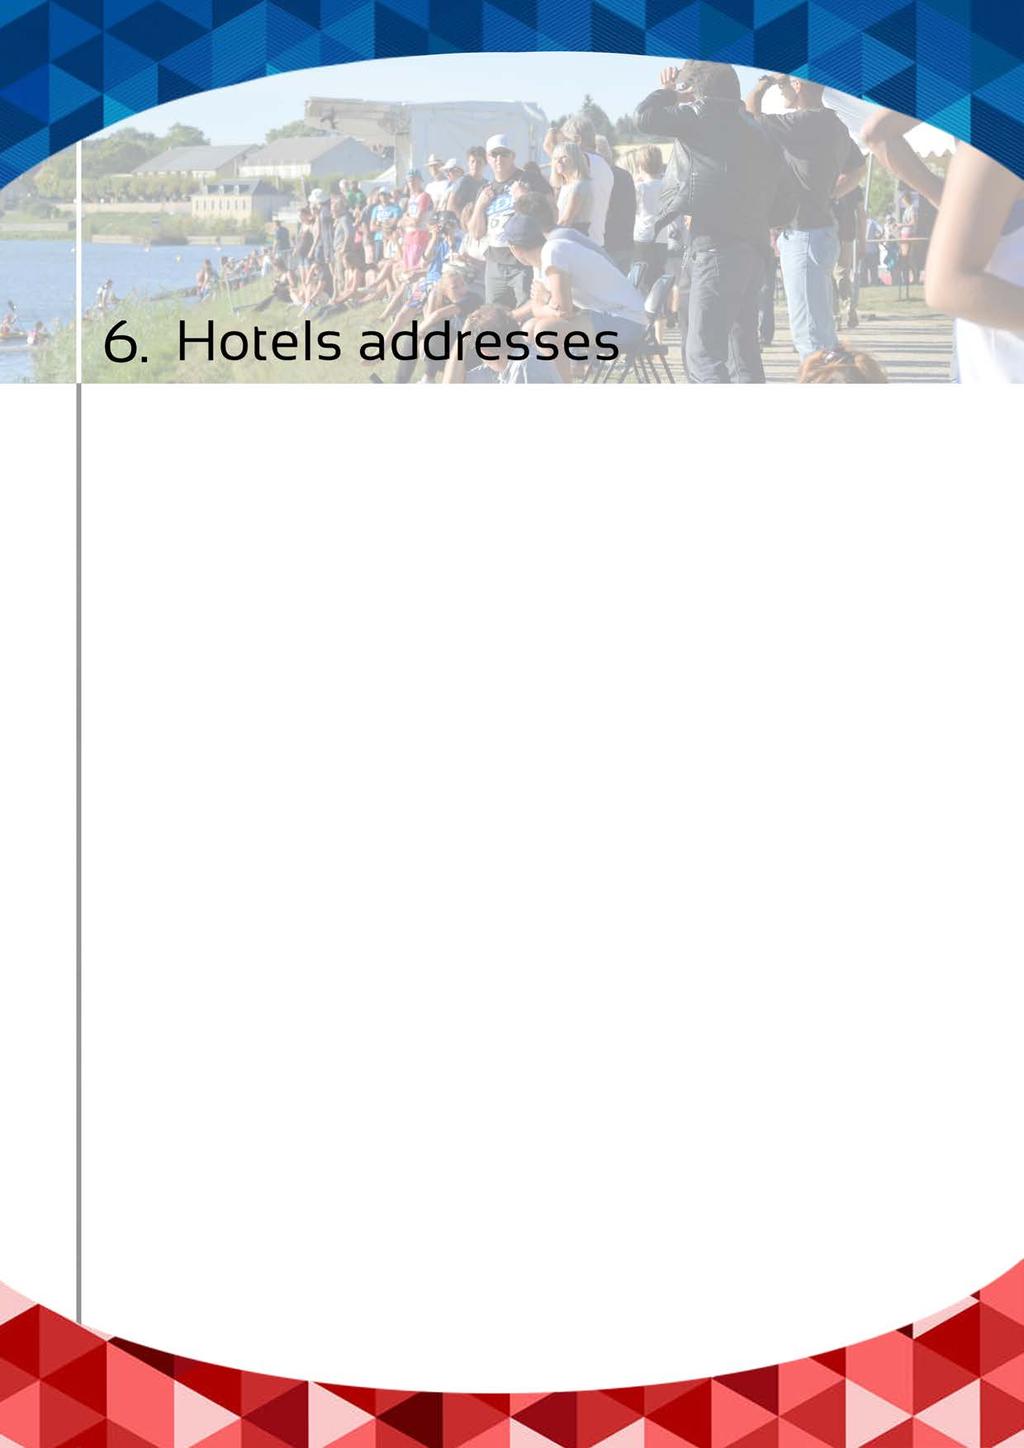 The organization does not support hotel bookings.